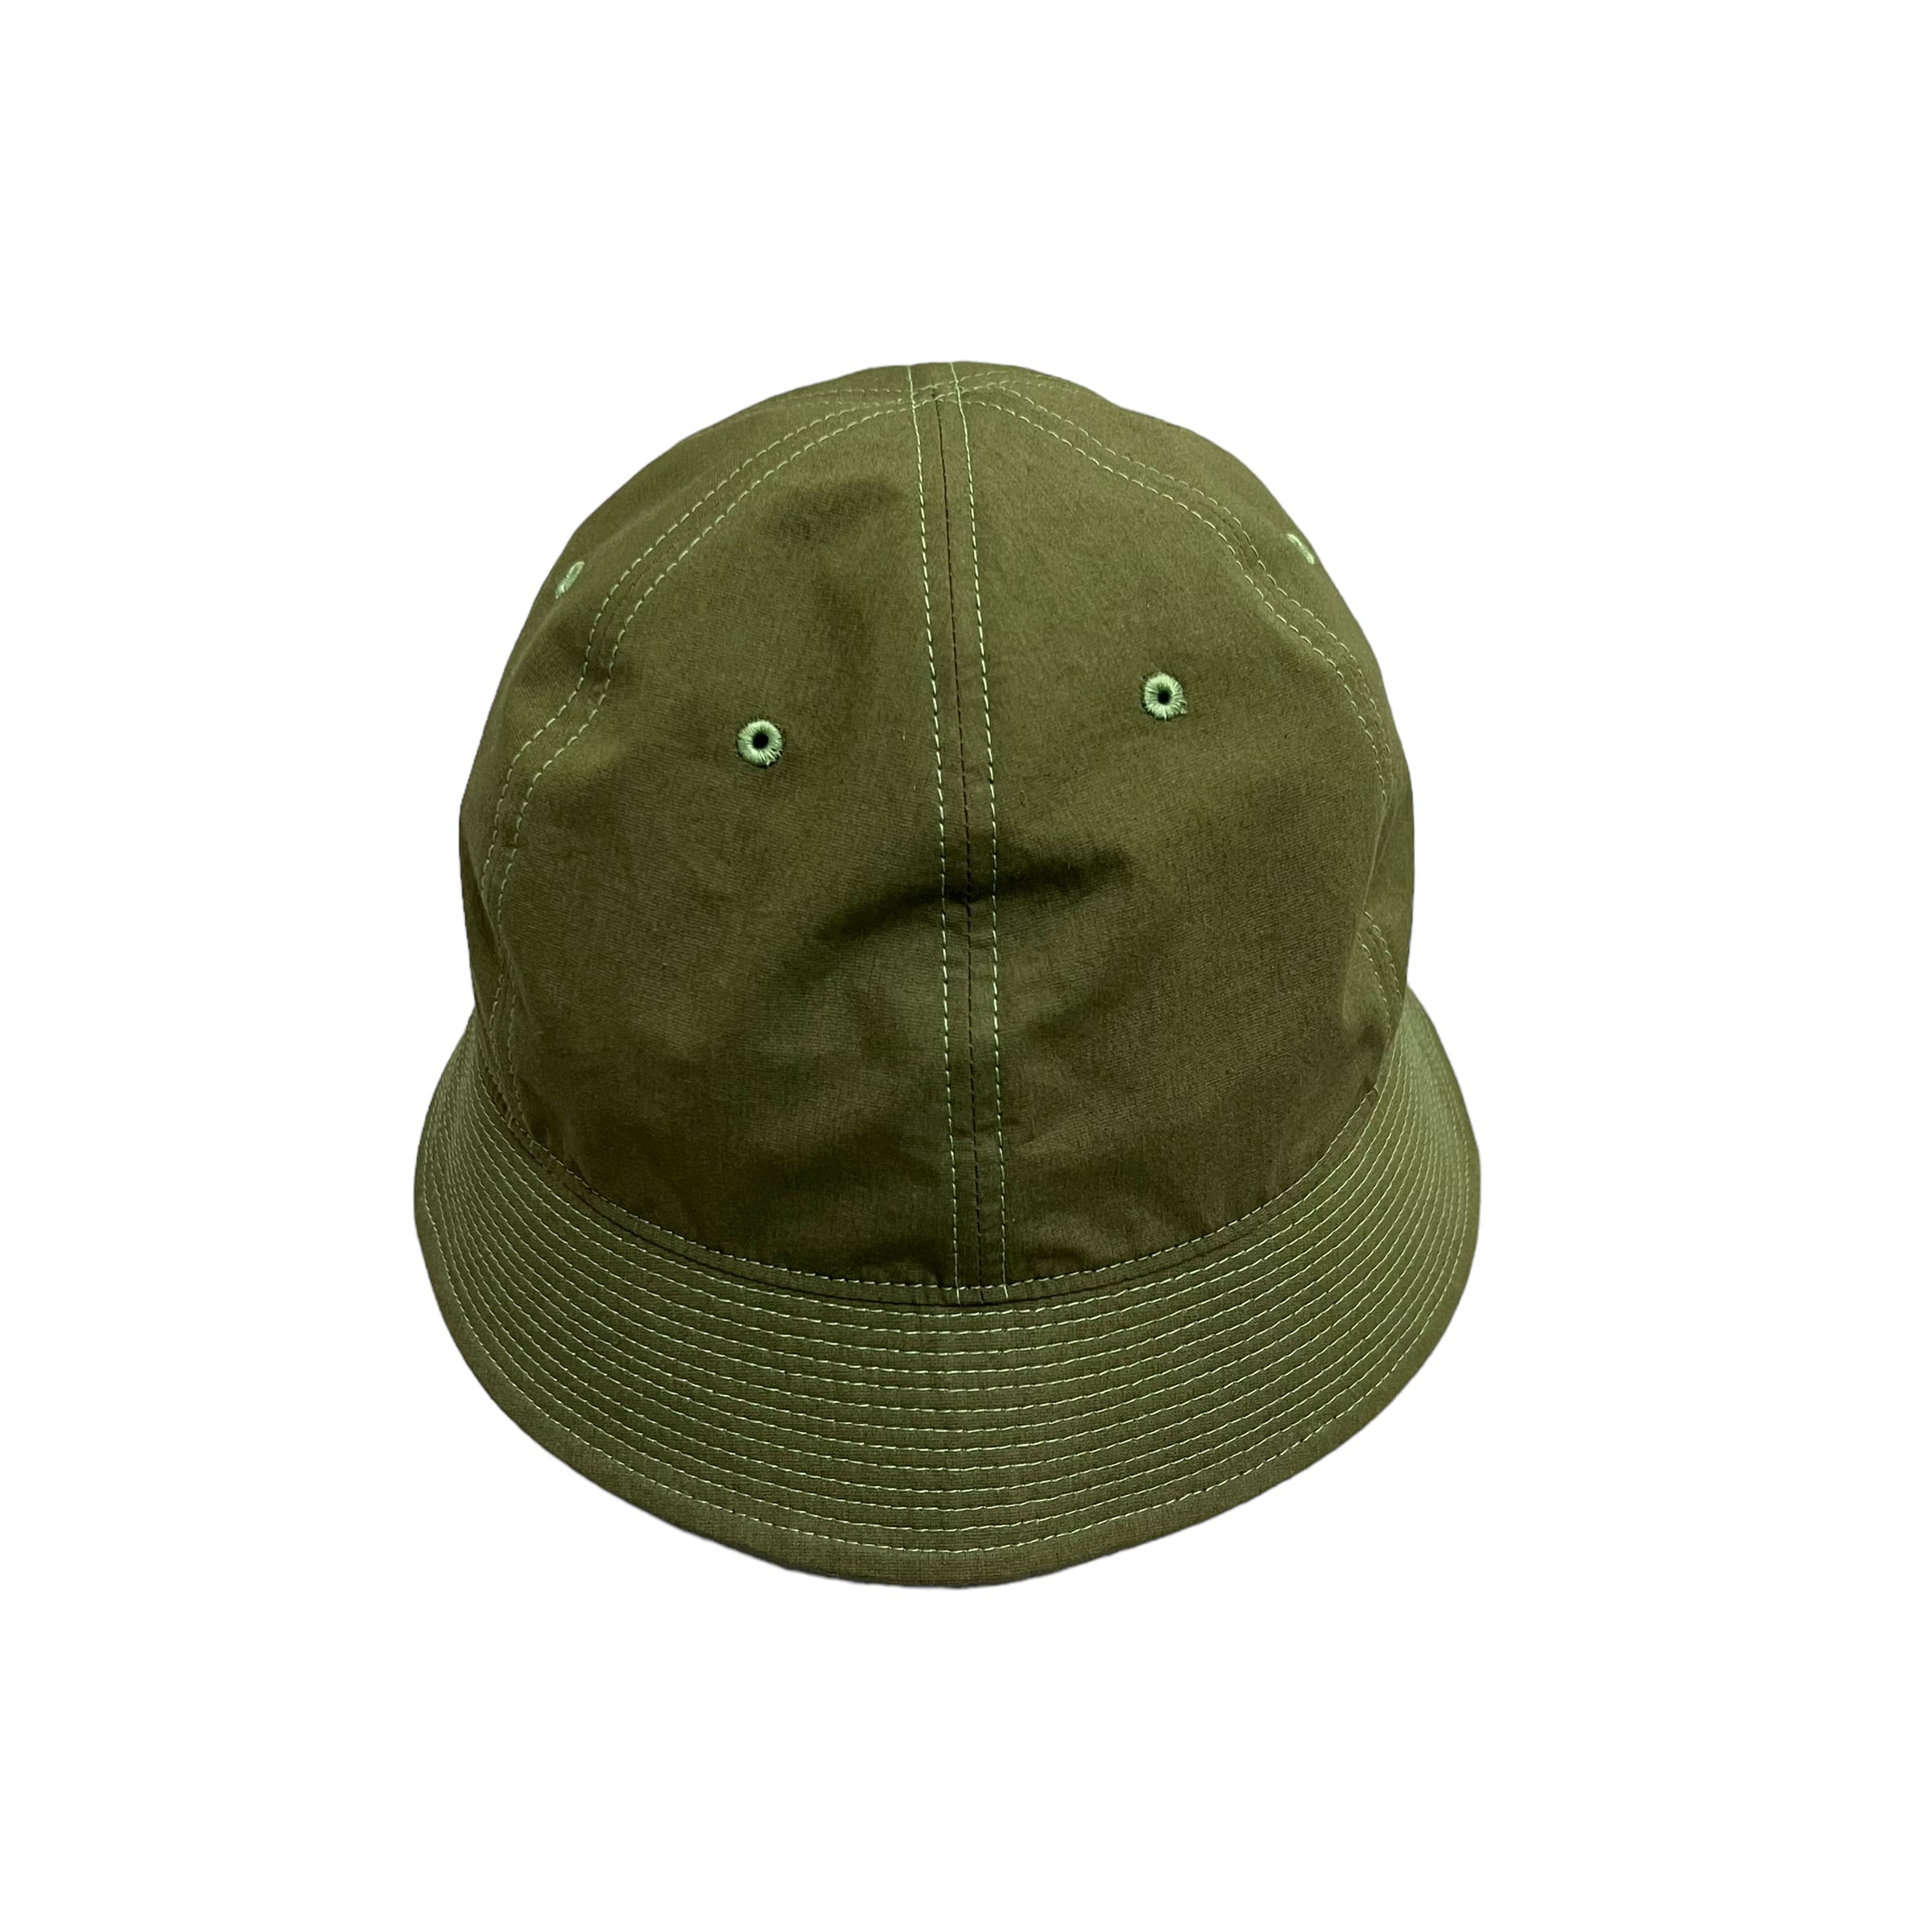 NOROLL / DETOURS WASHI HAT OLIVE | THE NEWAGE CLUB powered by BASE